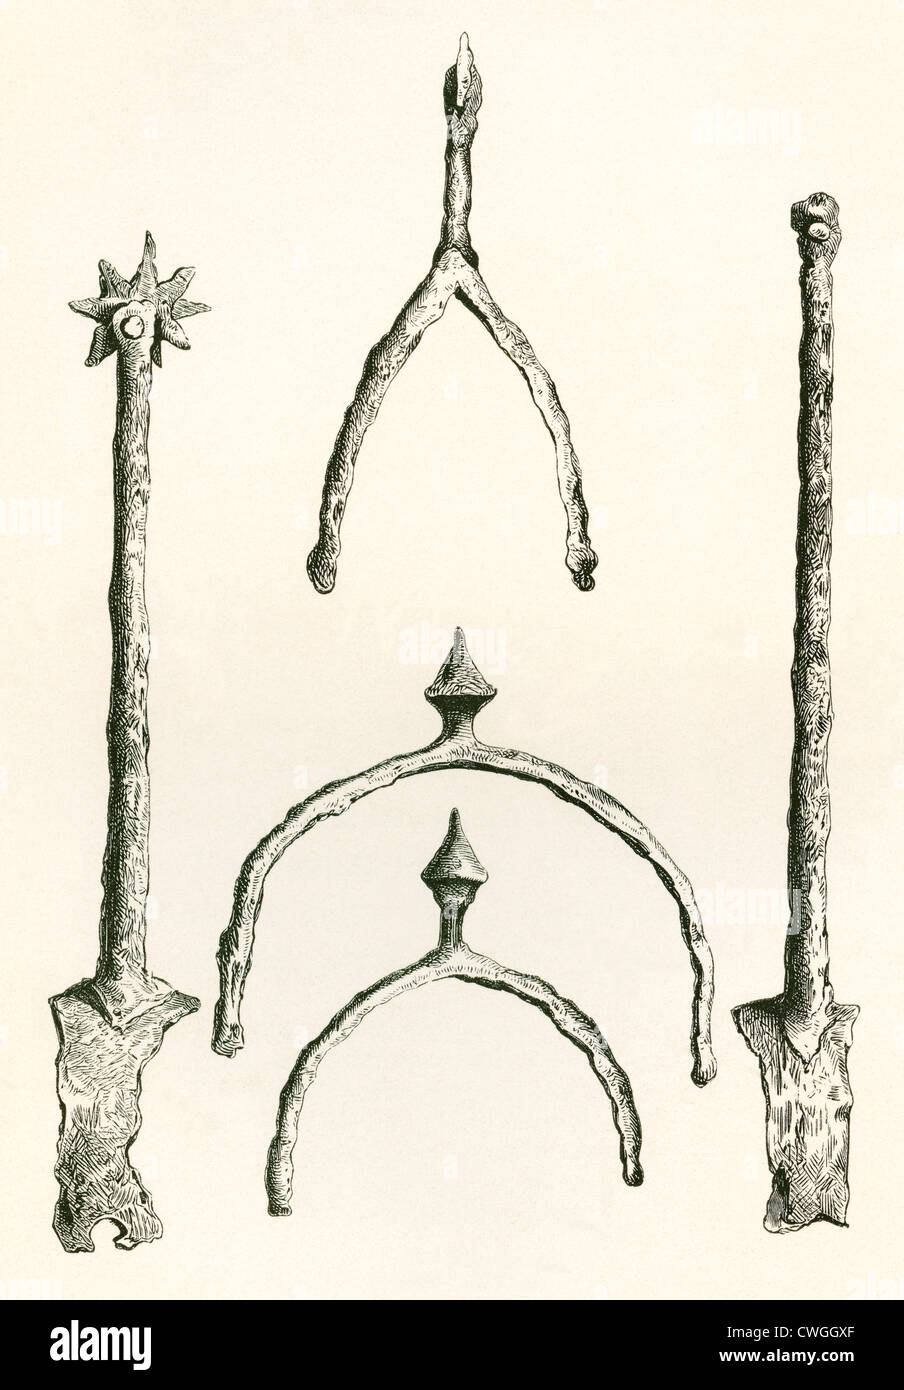 Spurs dating from c.1460 from the Tower Collection. From The British Army: Its Origins, Progress and Equipment, published 1868. Stock Photo